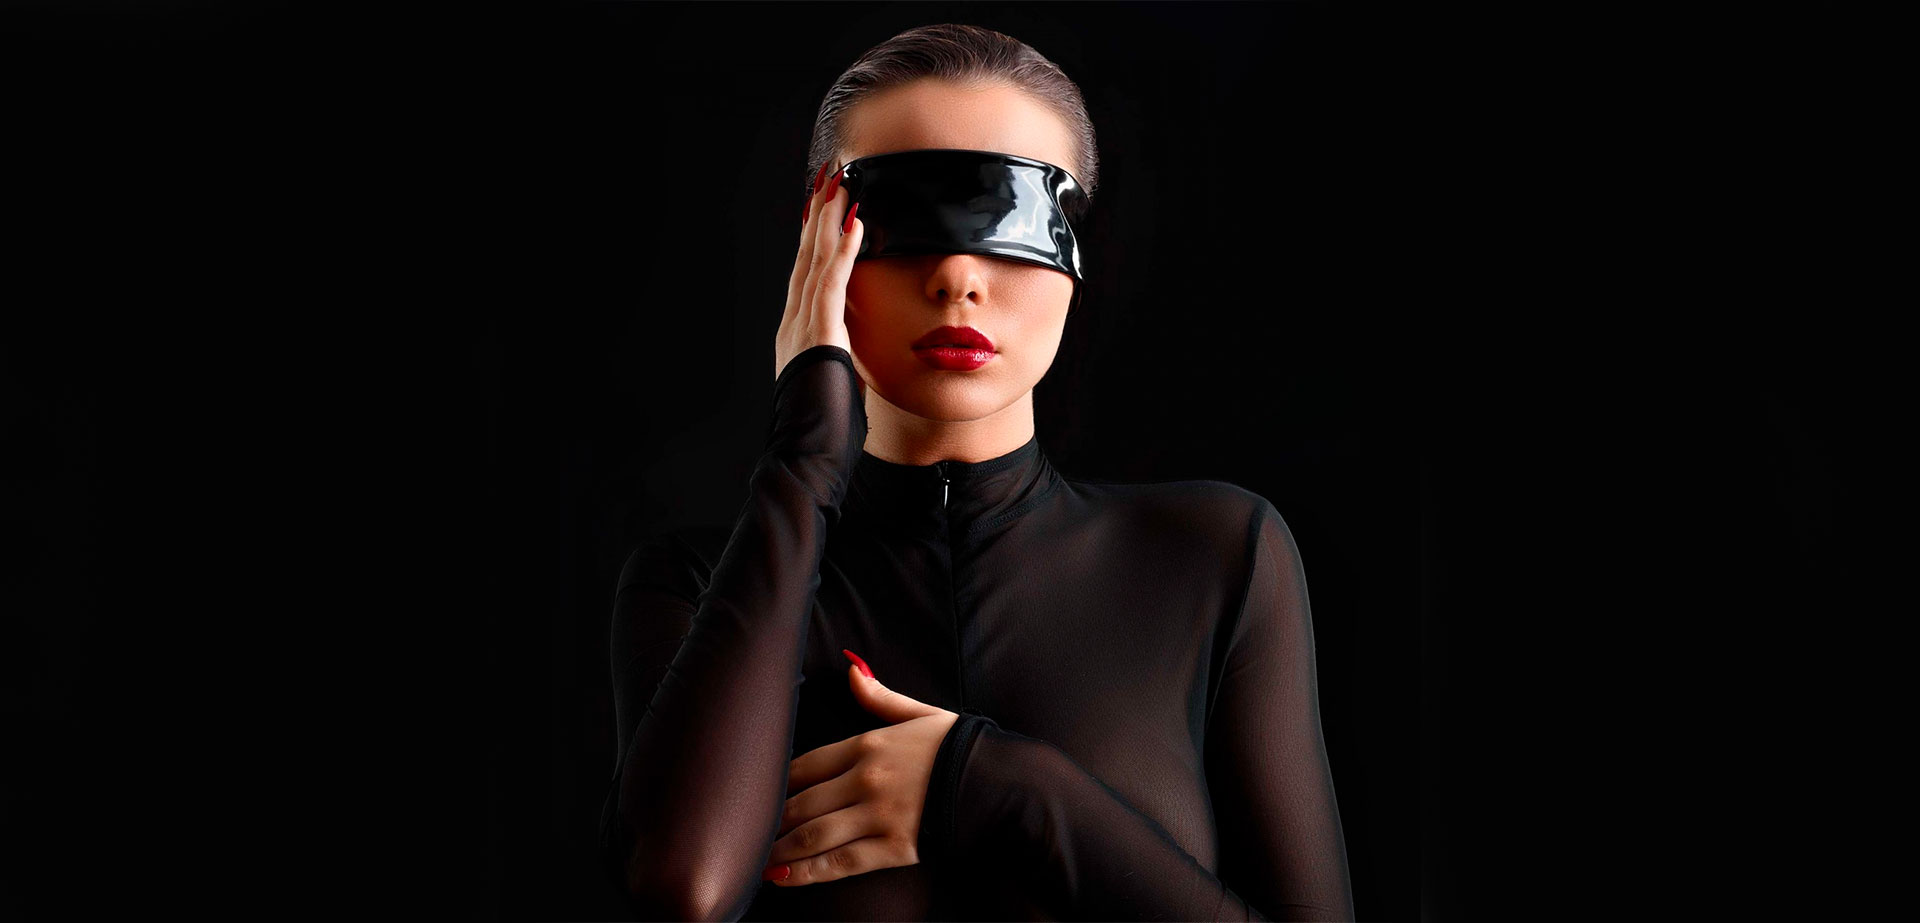 Woman In Black Blindfold For Sensation Play